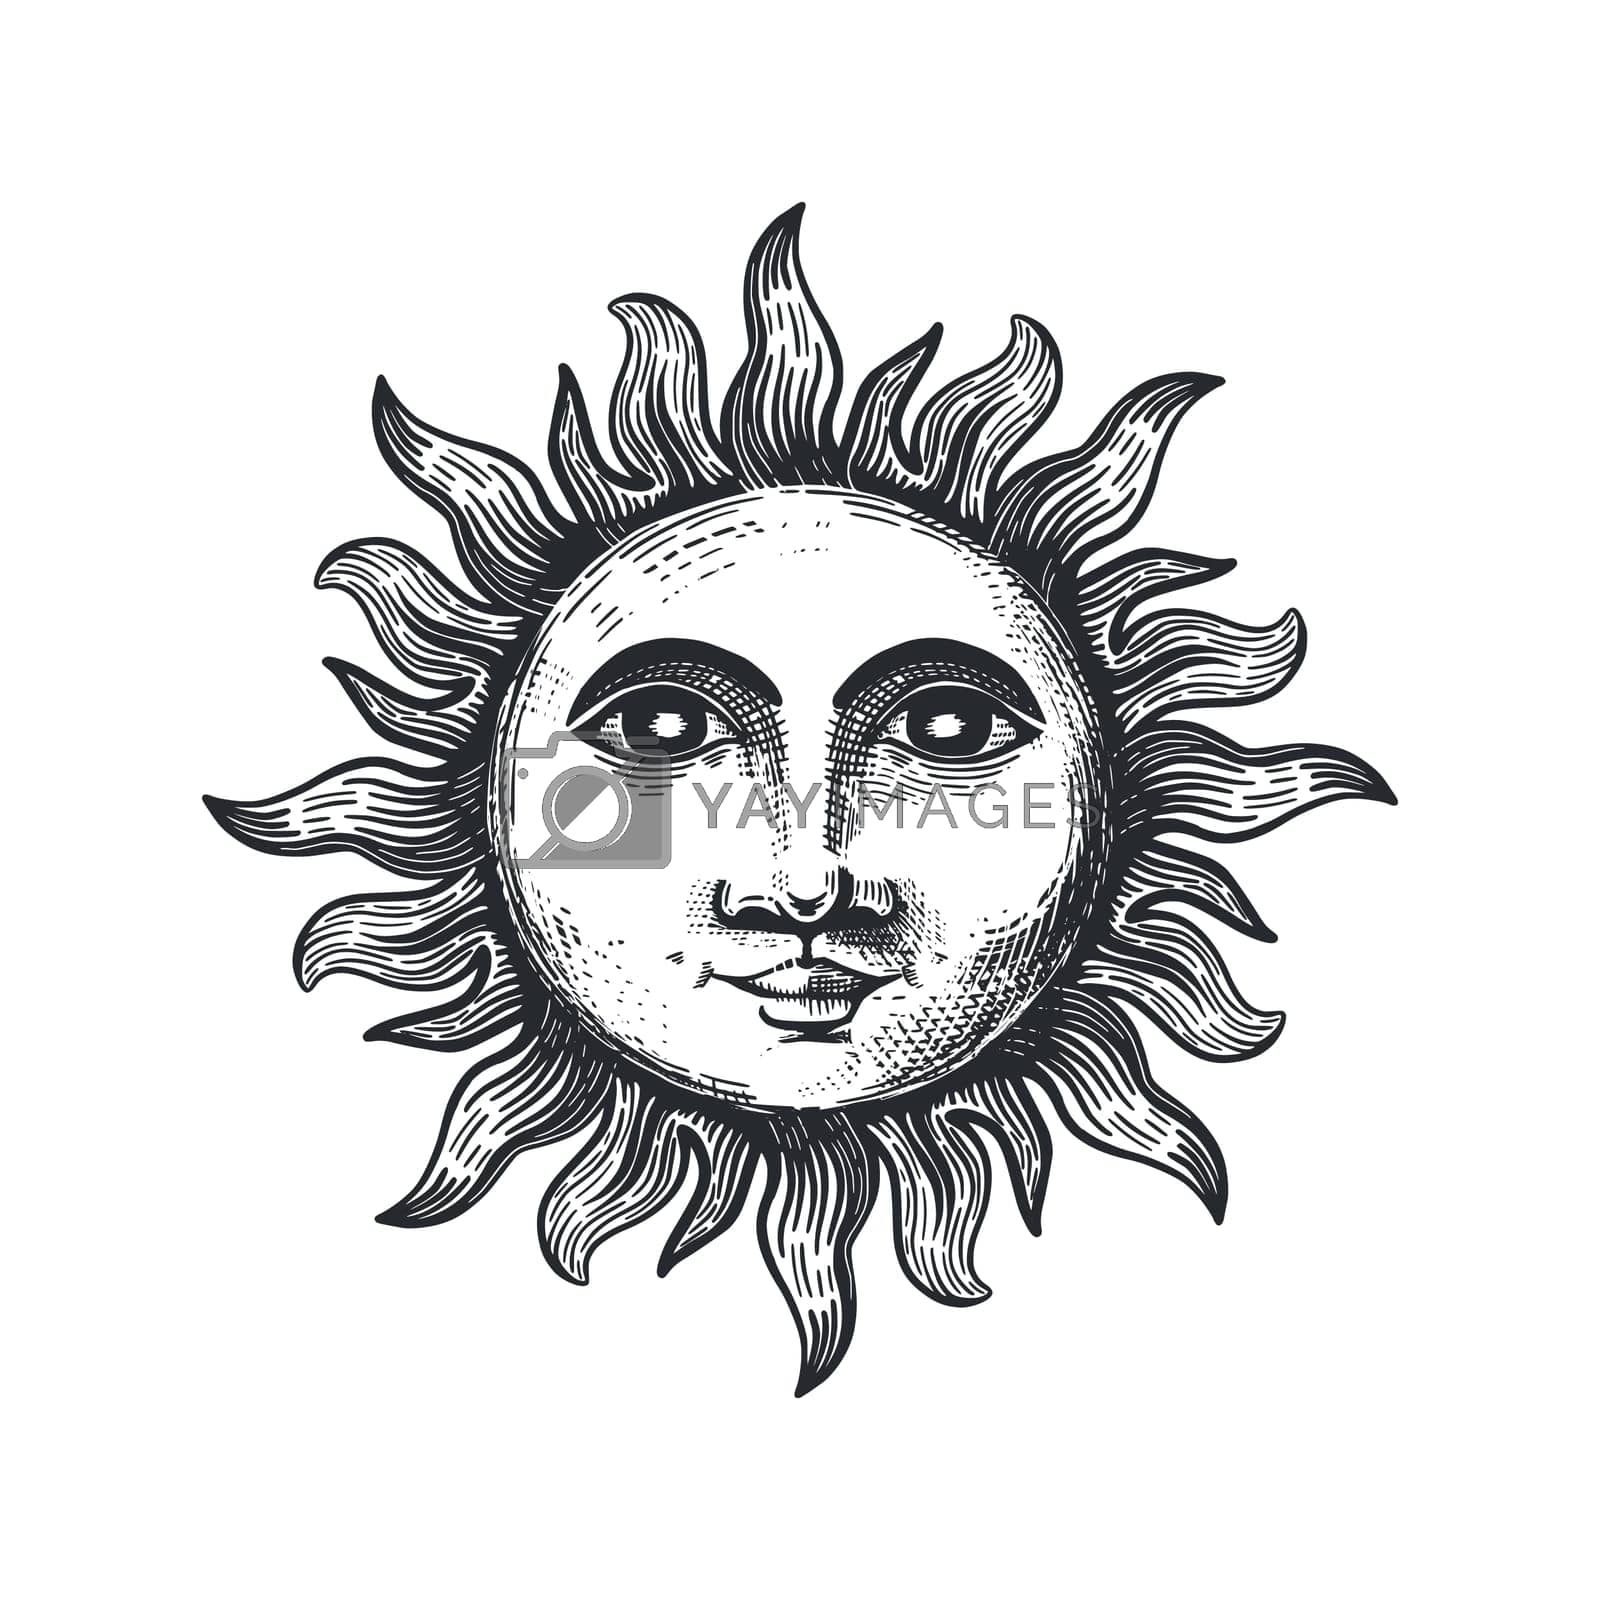 Royalty free image of Sun hand drawing in vintage style by alyalya